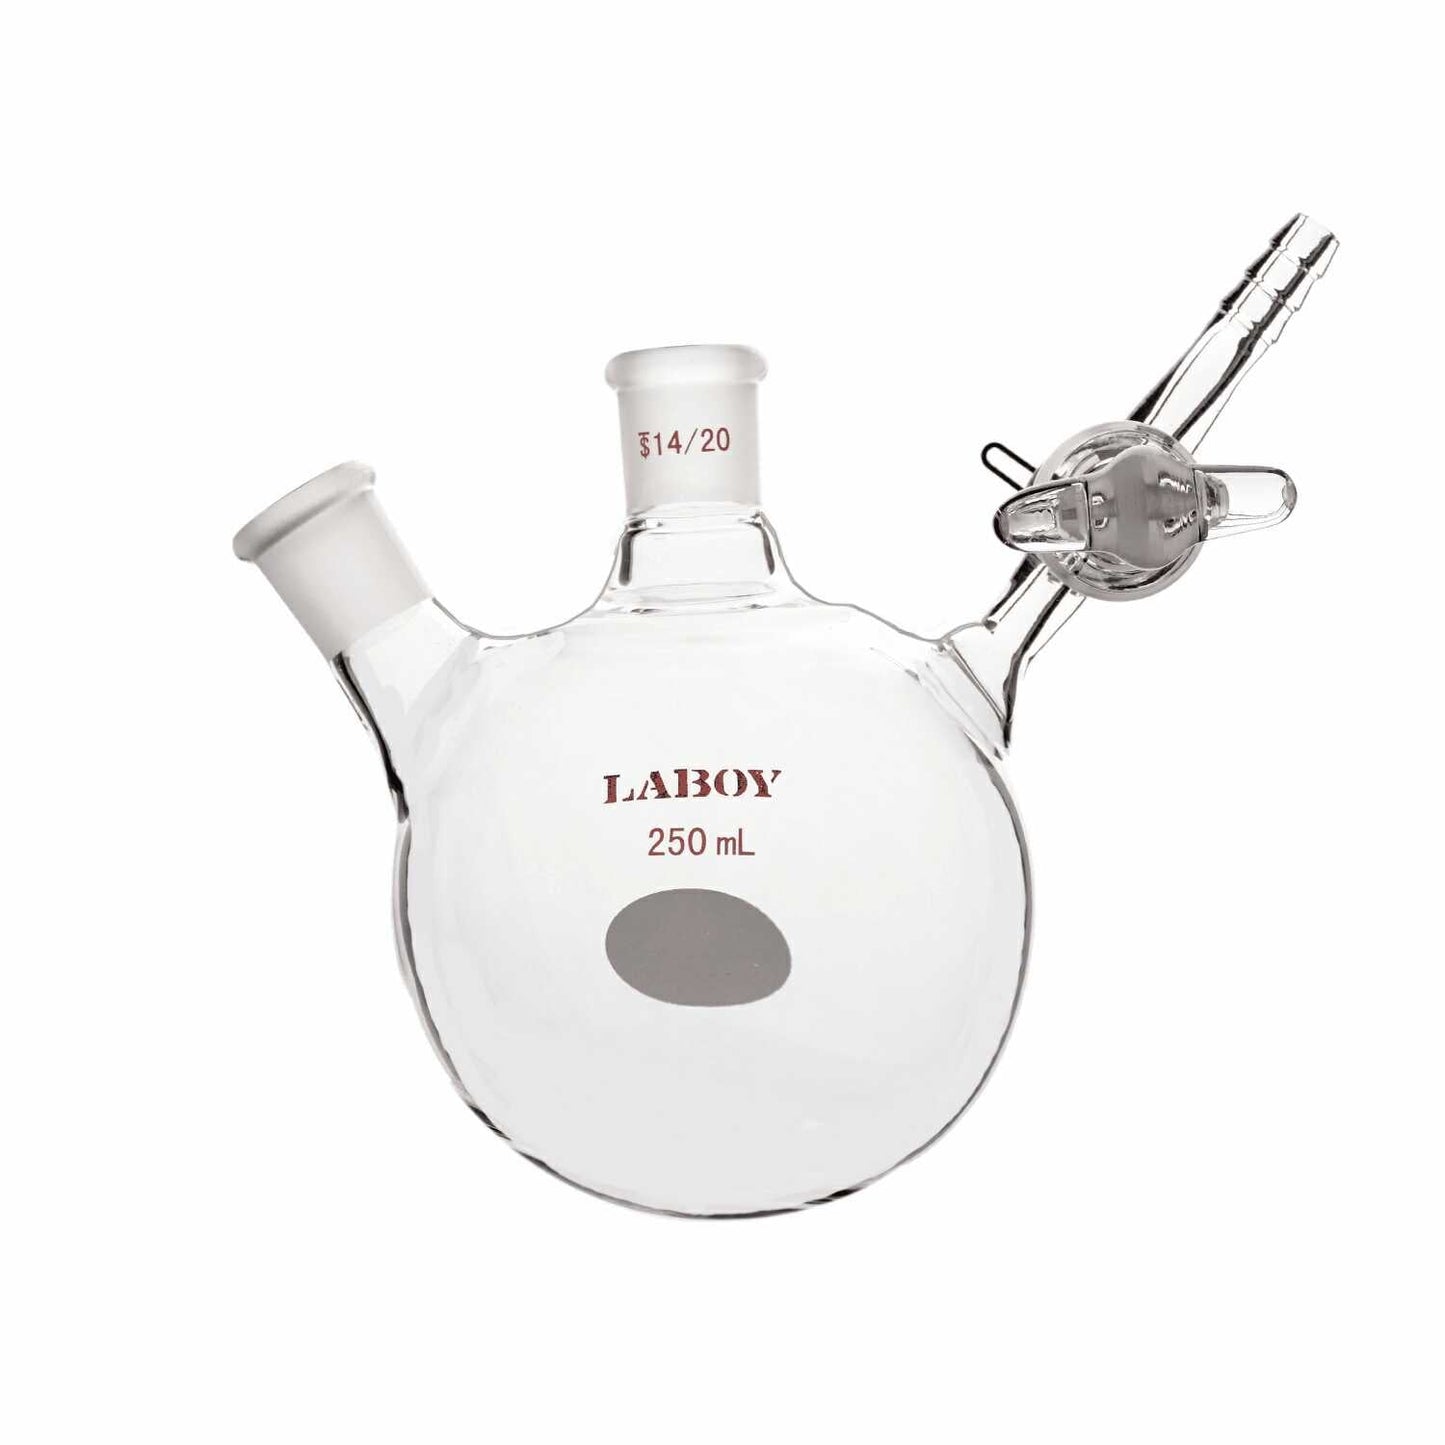 2-Neck Rb Schlenk Flask 250mL With Glass Stopcock And 14/20 Glass Joints